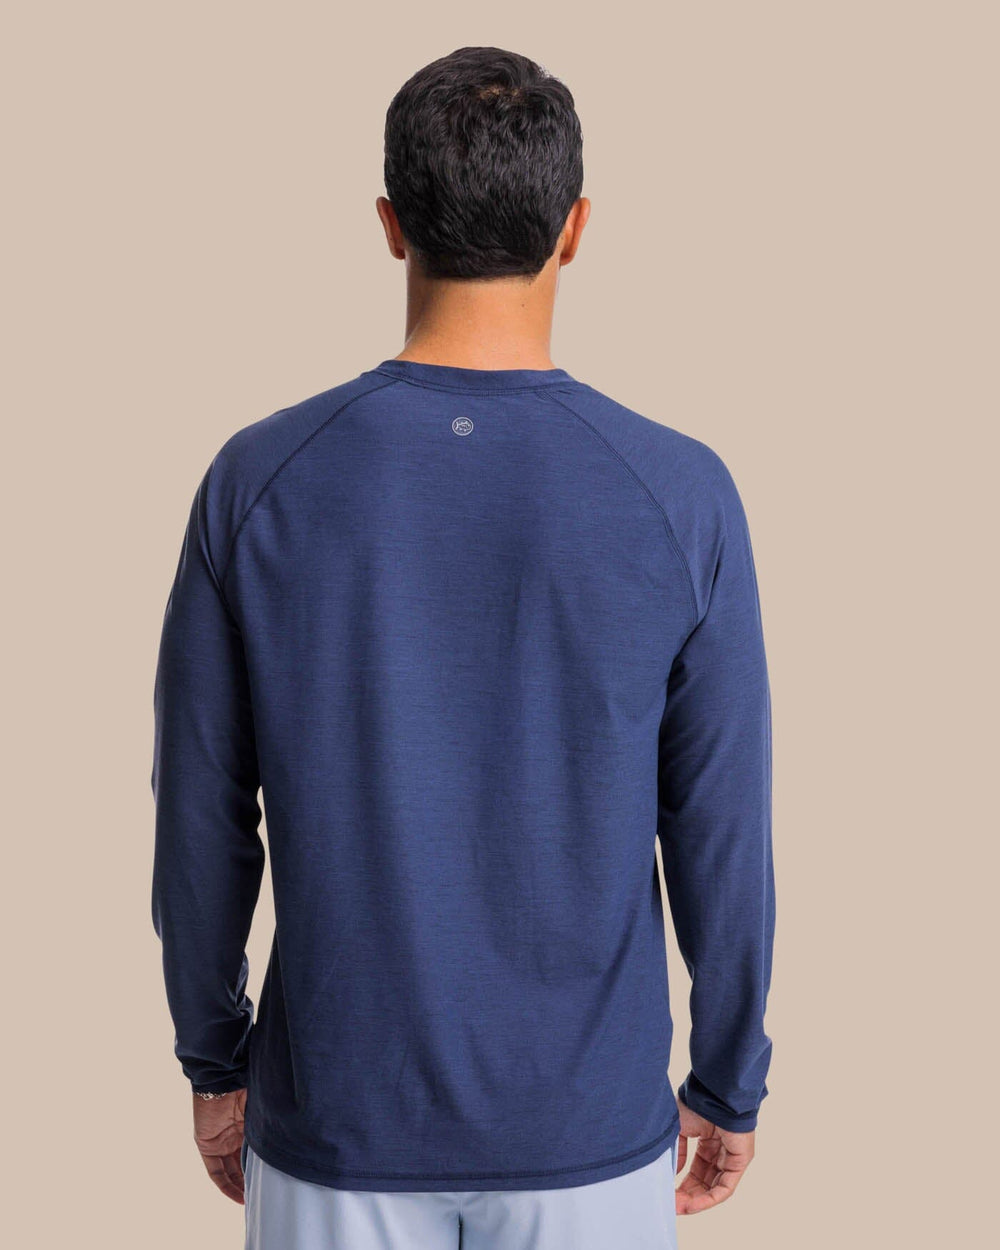 The back view of the Southern Tide brrr-illiant Performance Long Sleeve Tee by Southern Tide - Nautical Navy